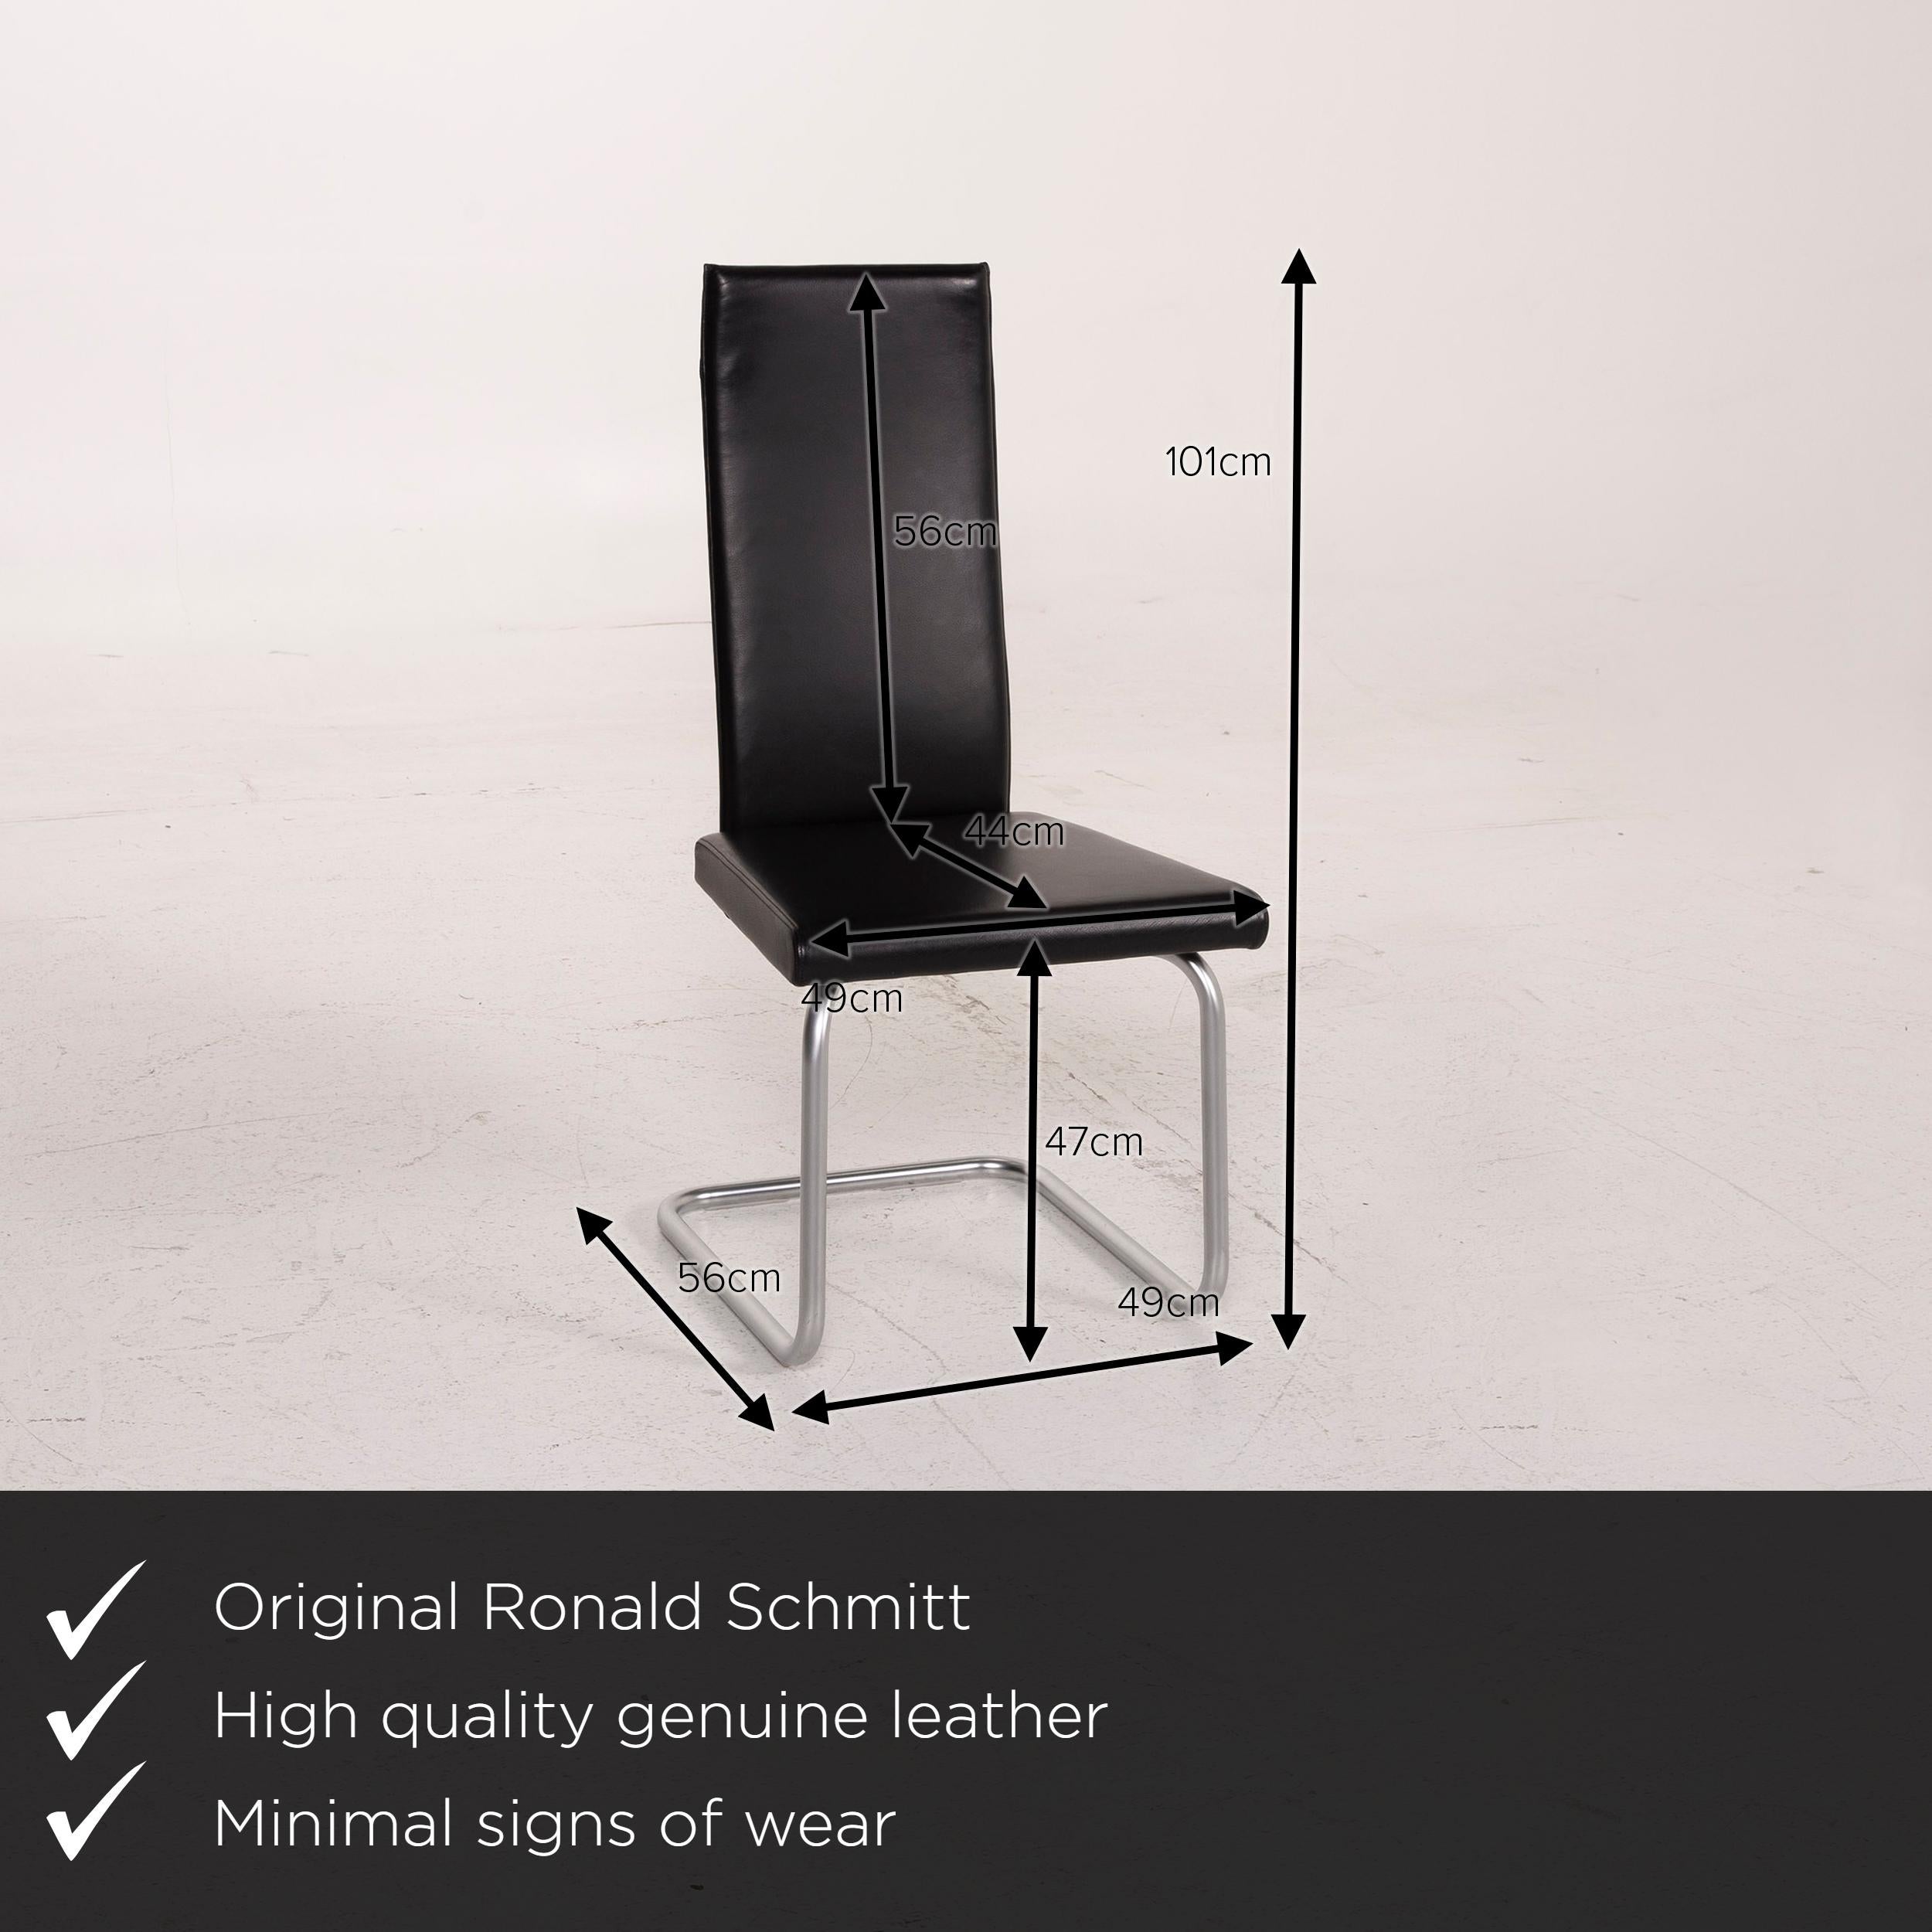 We present to you a Ronald Schmitt leather chair black.
 
 

 Product measurements in centimeters:
 

Depth 56
Width 49
Height 101
Seat height 47
Seat depth 44
Seat width 49
Back height 56.
   